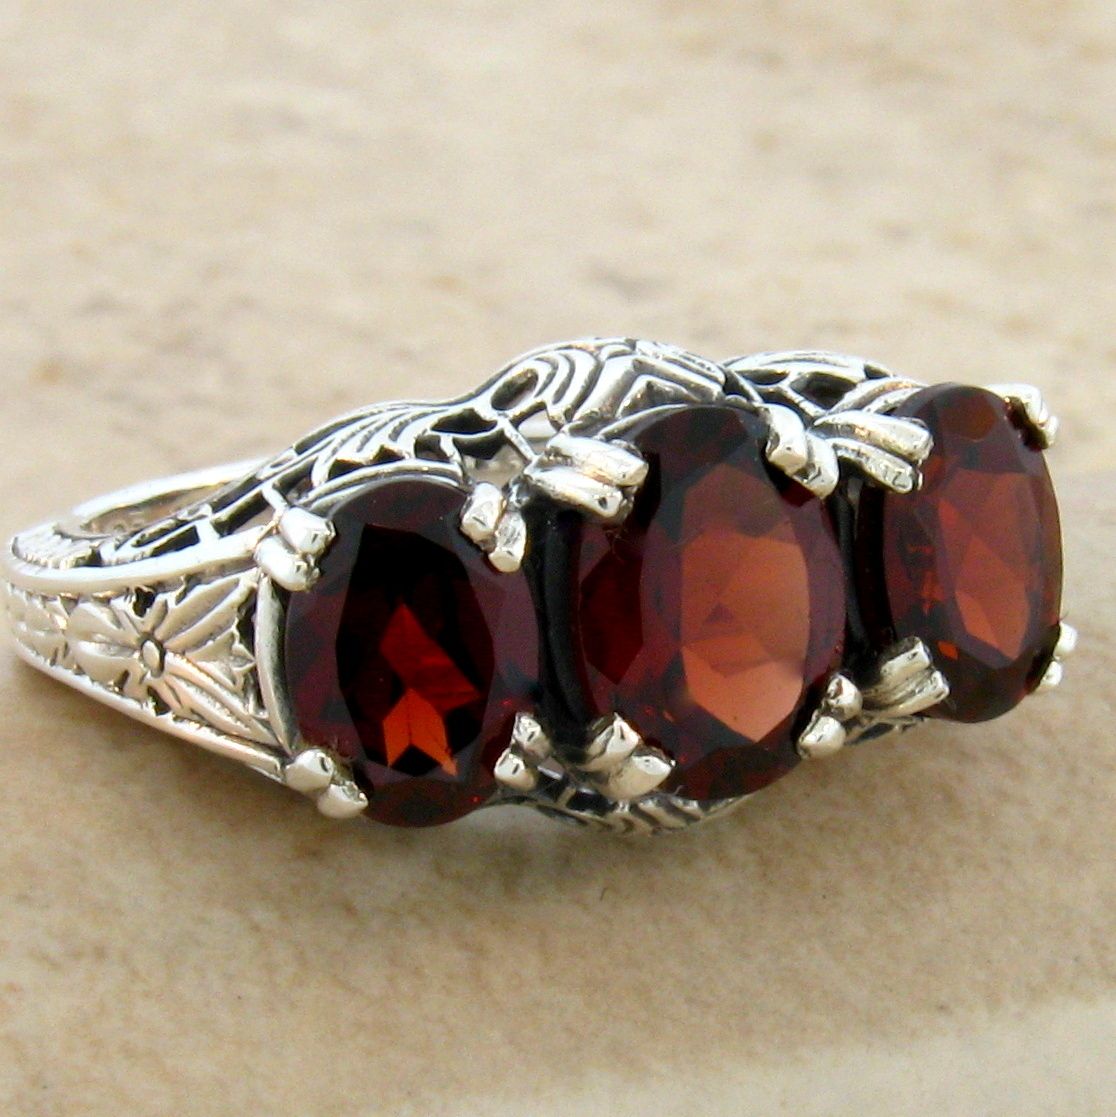 #865 GENUINE GARNET .925 STERLING SILVER ANTIQUE STYLE RING SIZE 4.75